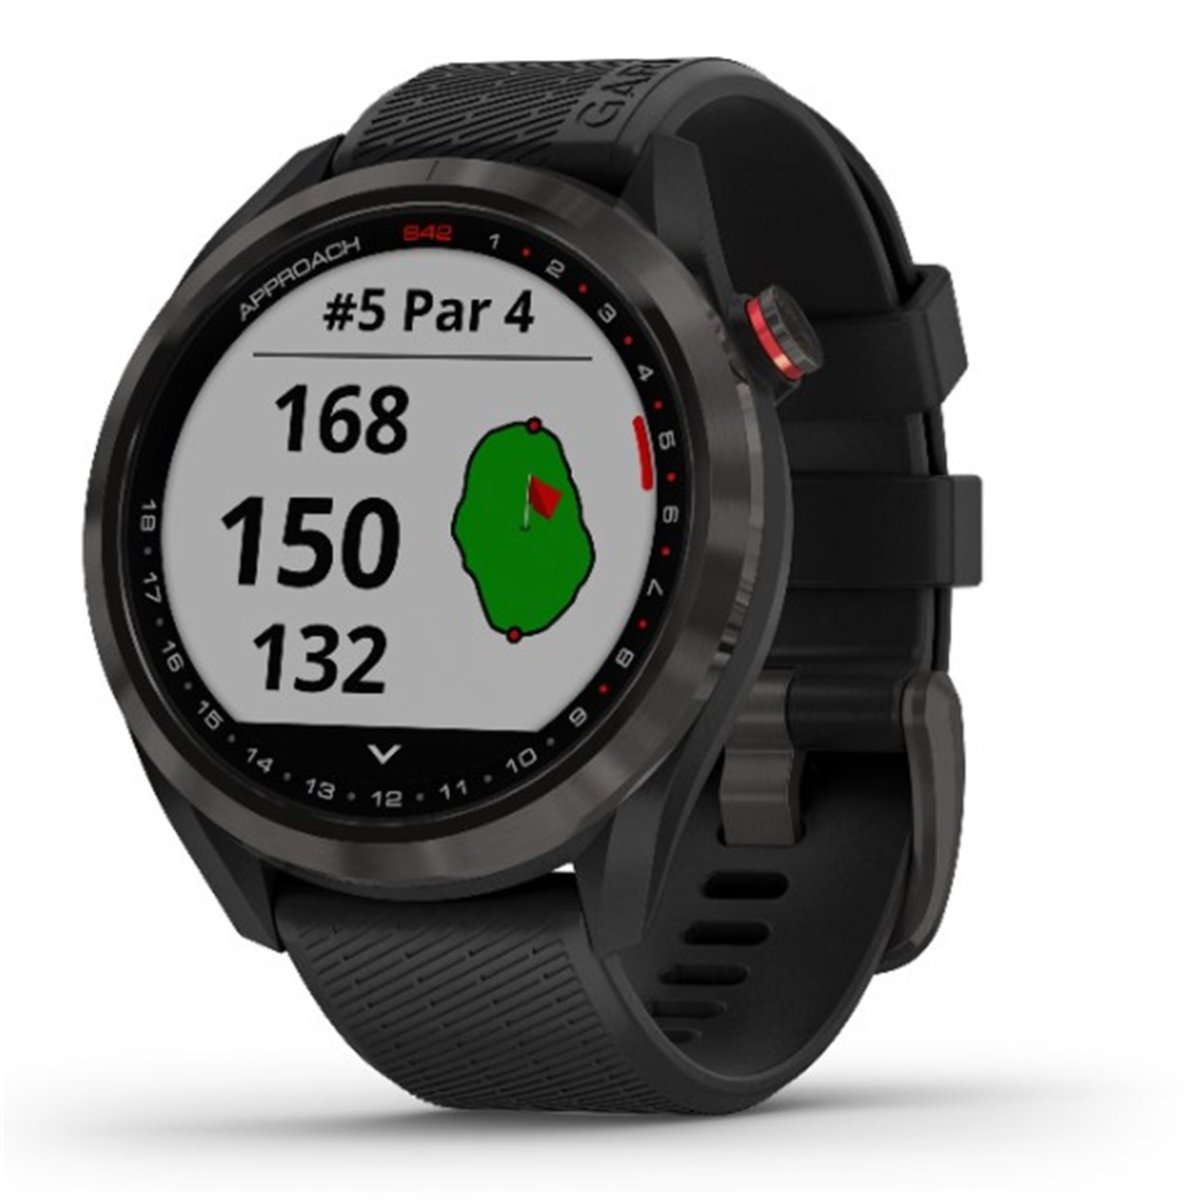 Shop Garmin GPS golf watches on Morning Read's online pro shop, powered by GlobalGolf.